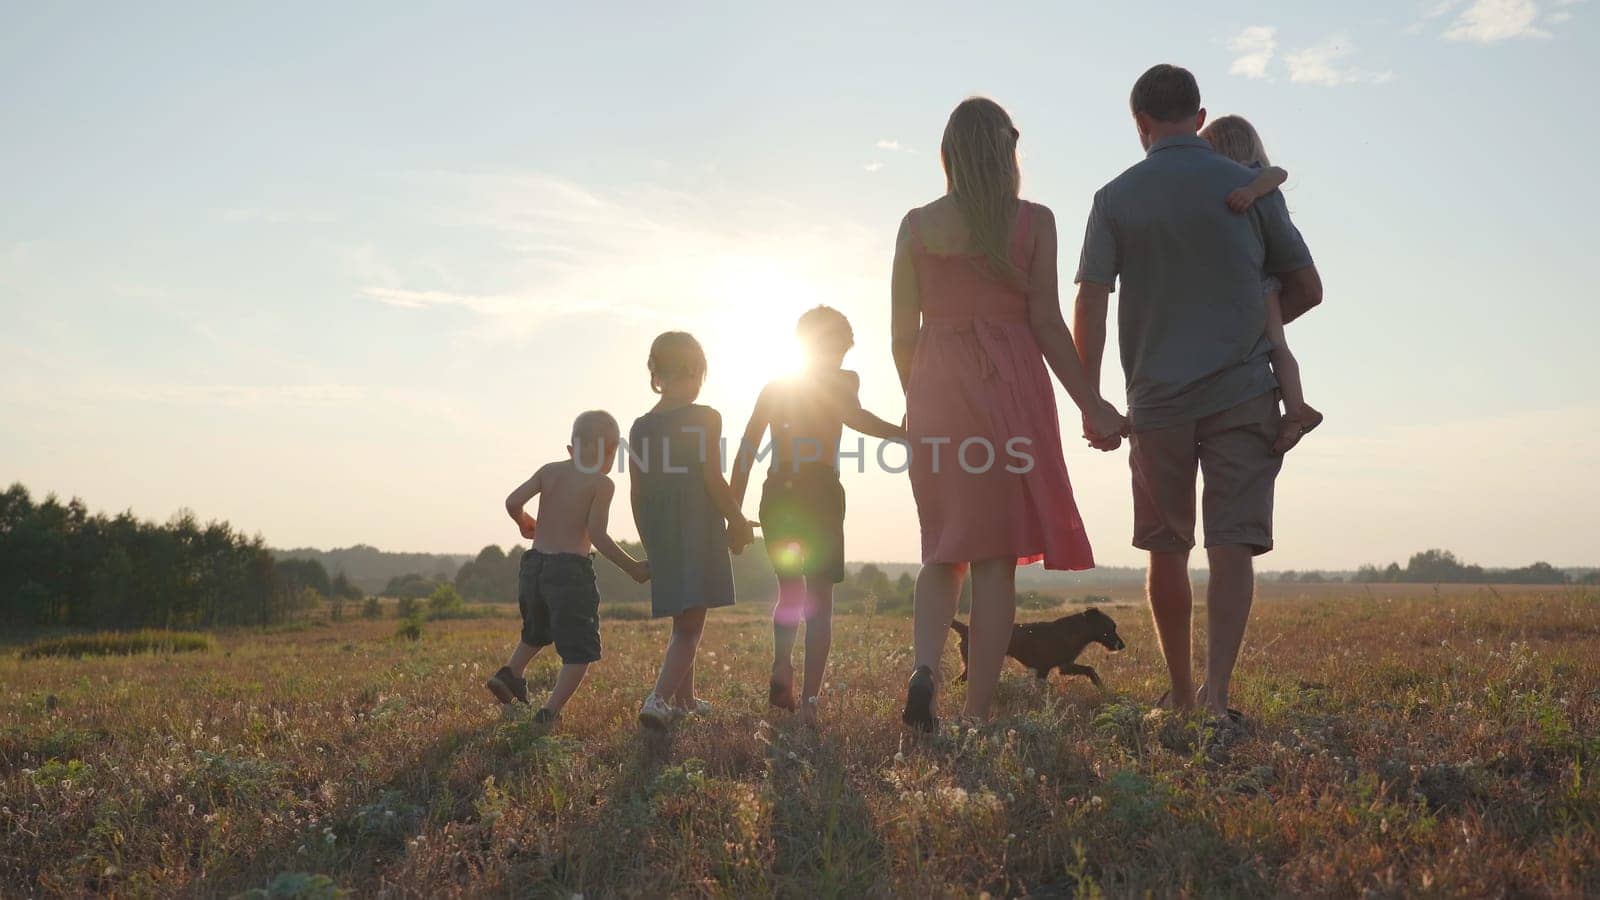 A friendly large family walks across the field at sunset with dog